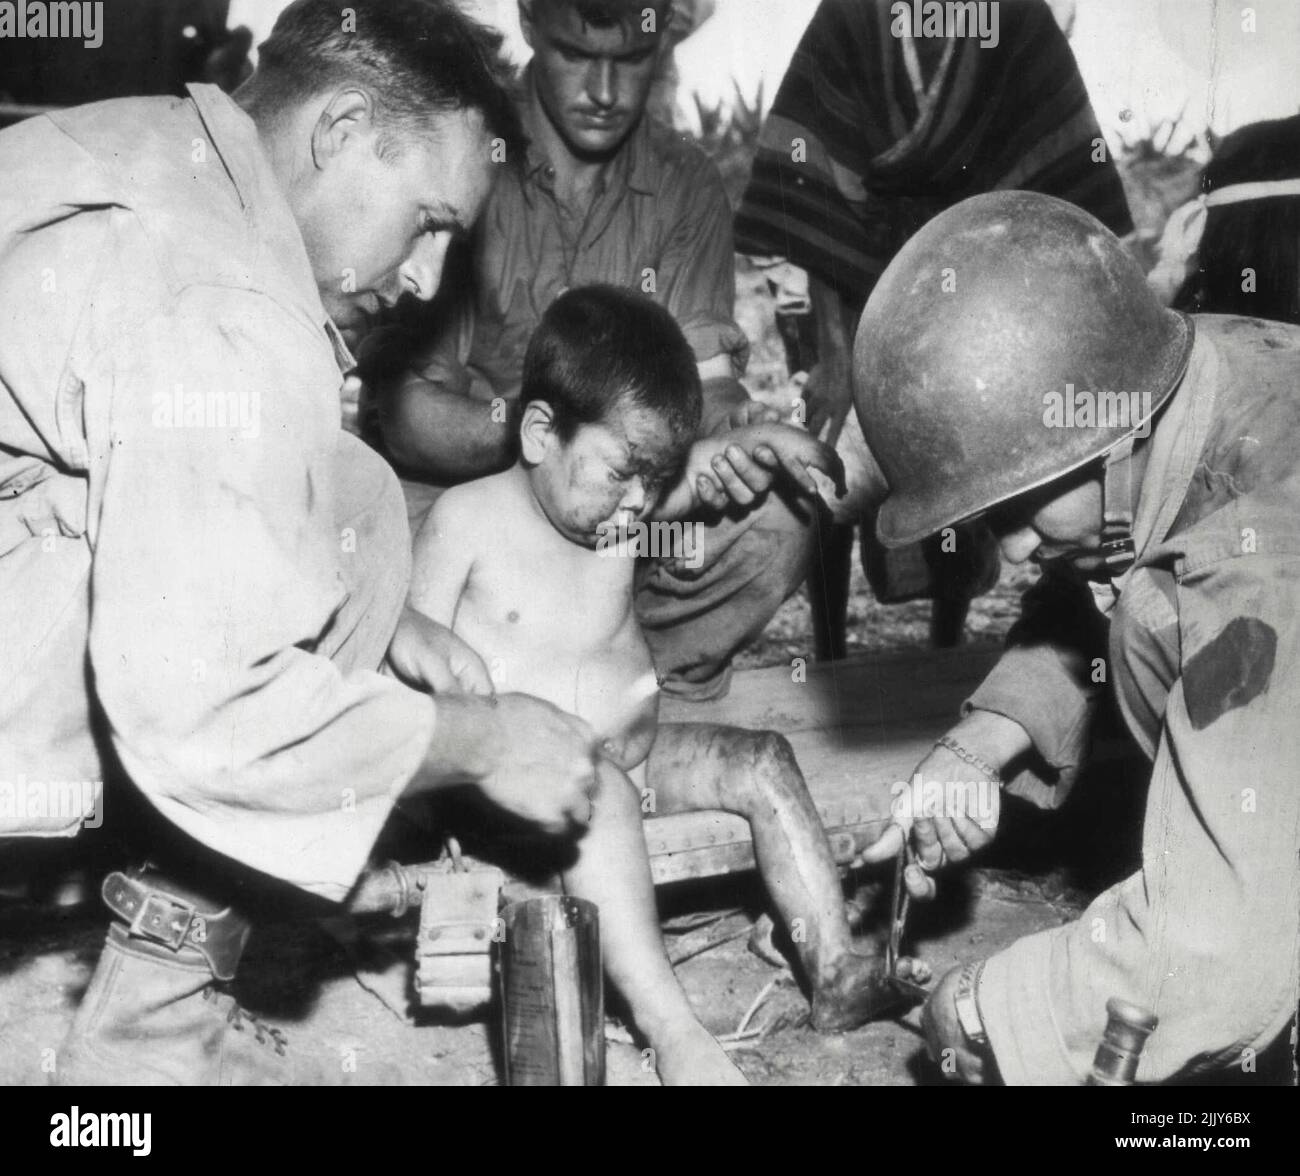 Medical Attention For Japanese Child: Medical ***** of Tenth Army work on the toe of a small Japanese boy who was injured ***** during the American invasion of the Japanese Ryukyu island of Okinawa. American force invaded the island April 1. ***** : Japanese boy on Ryukyu Island has an injured ***** treated by kindly US Army Medical Corps men. The boy had been hurt during the American invasion. April 24, 1945. (Photo by AP Wirephoto). Stock Photo